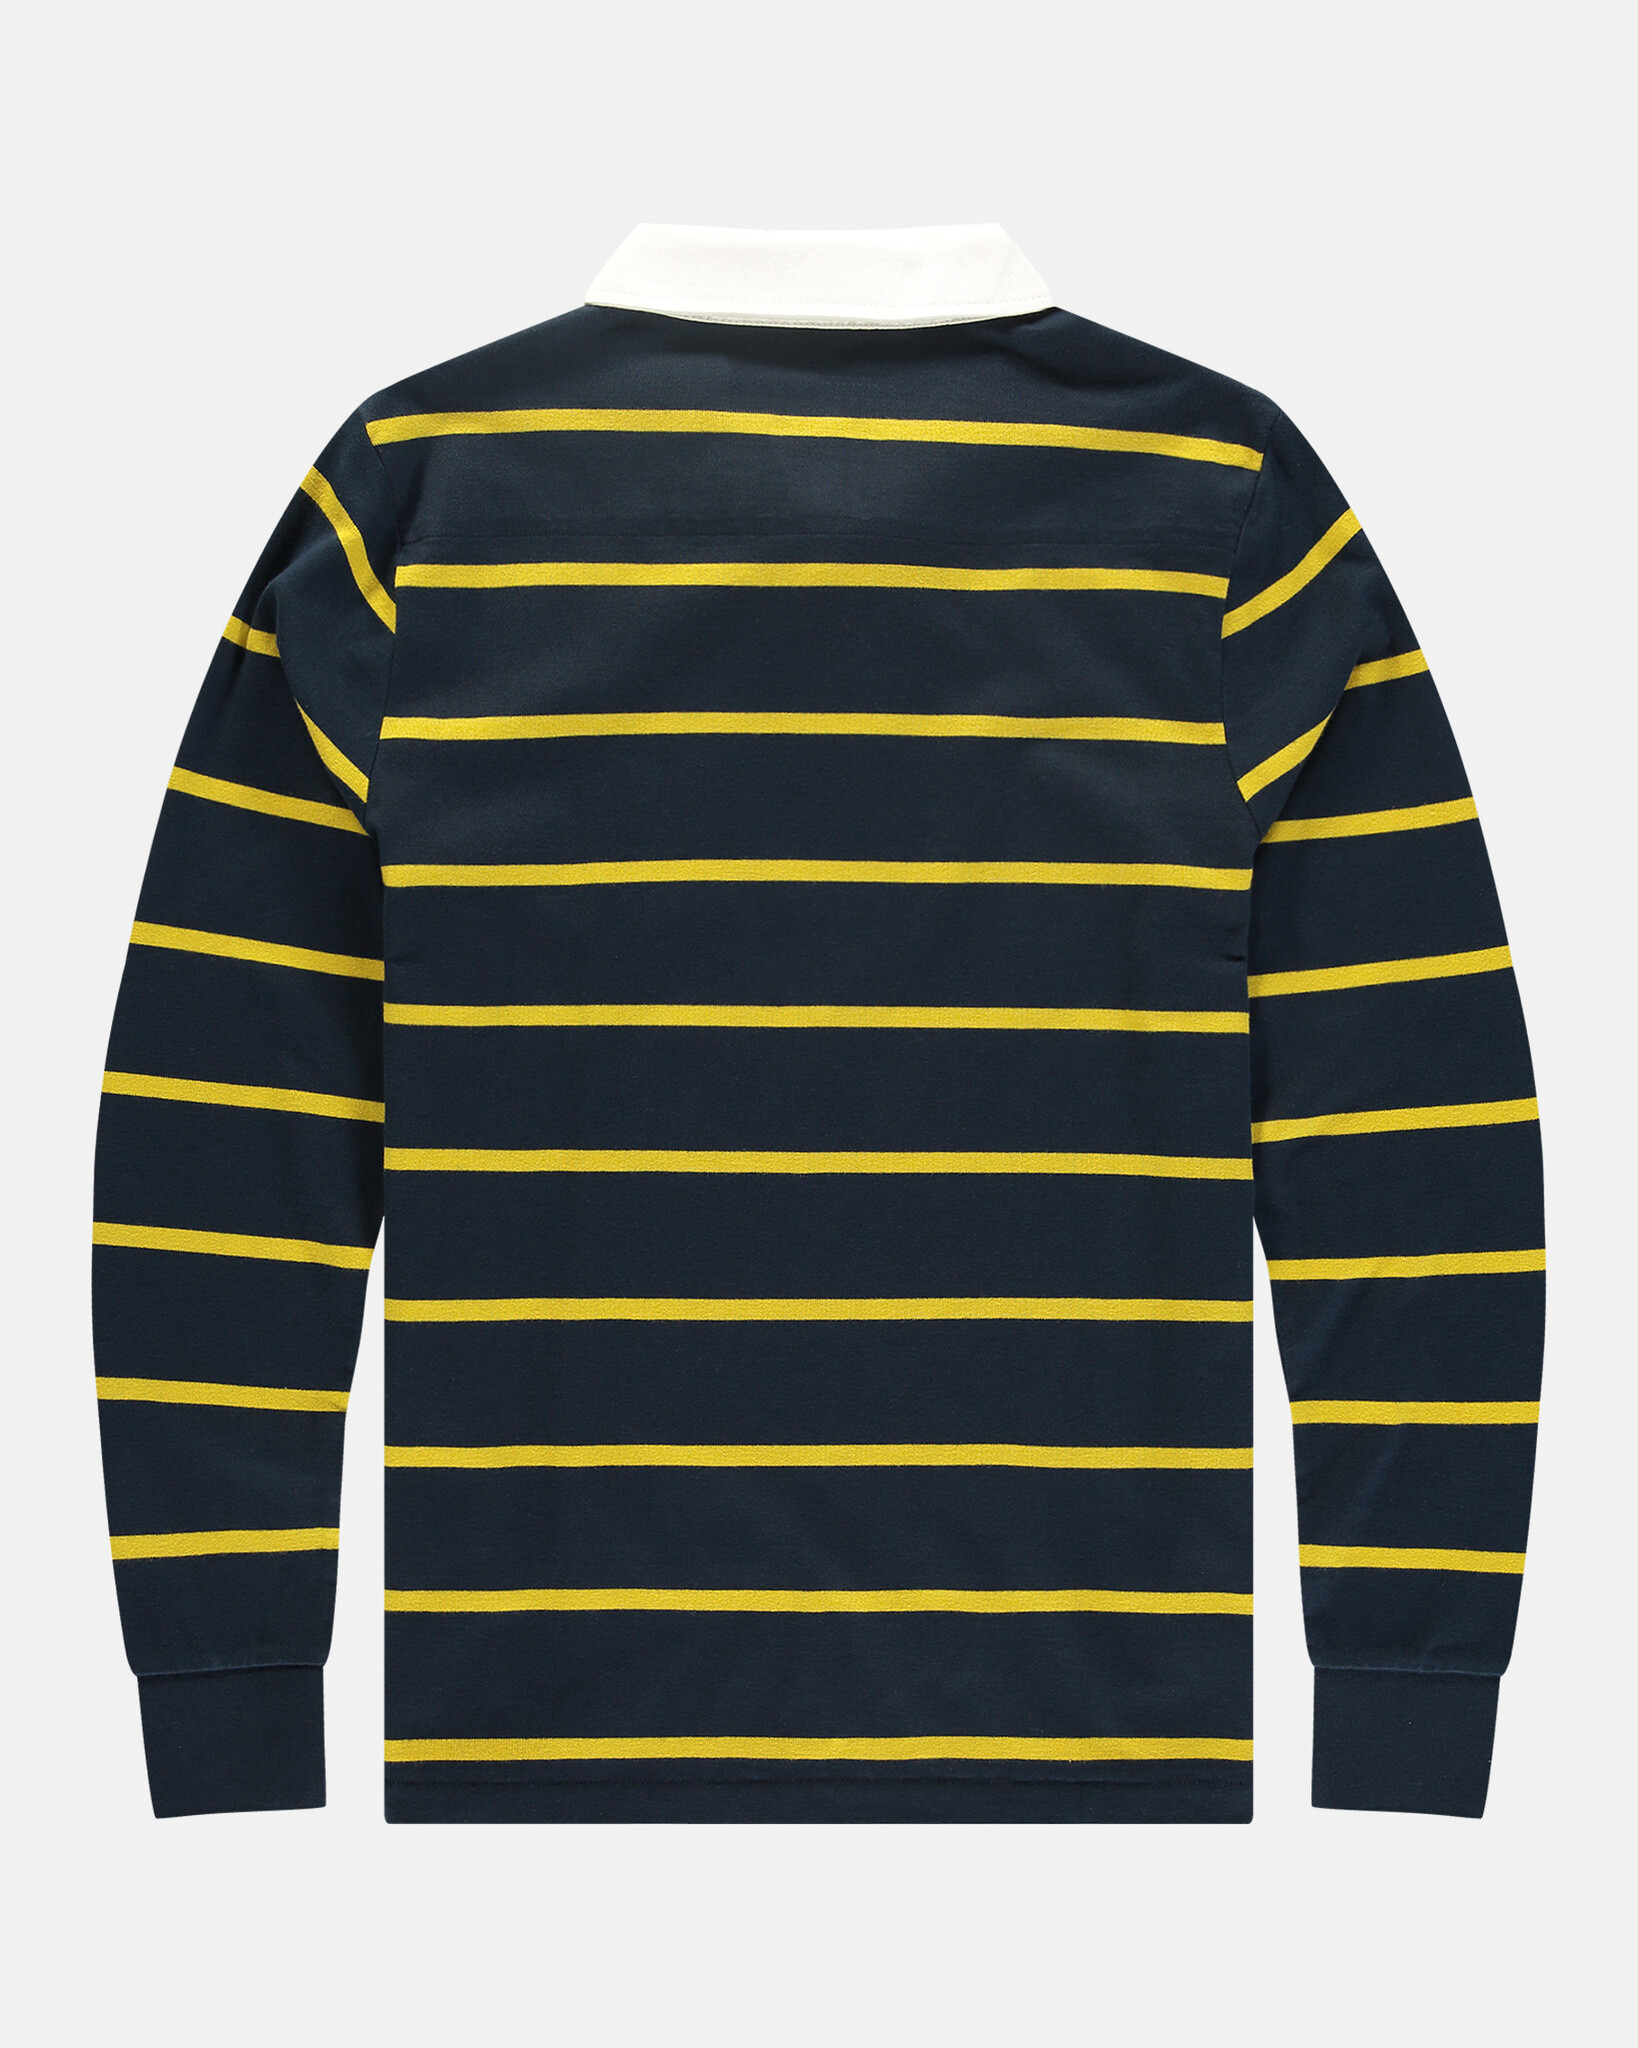 The 100% cotton classic knitted rugby shirt